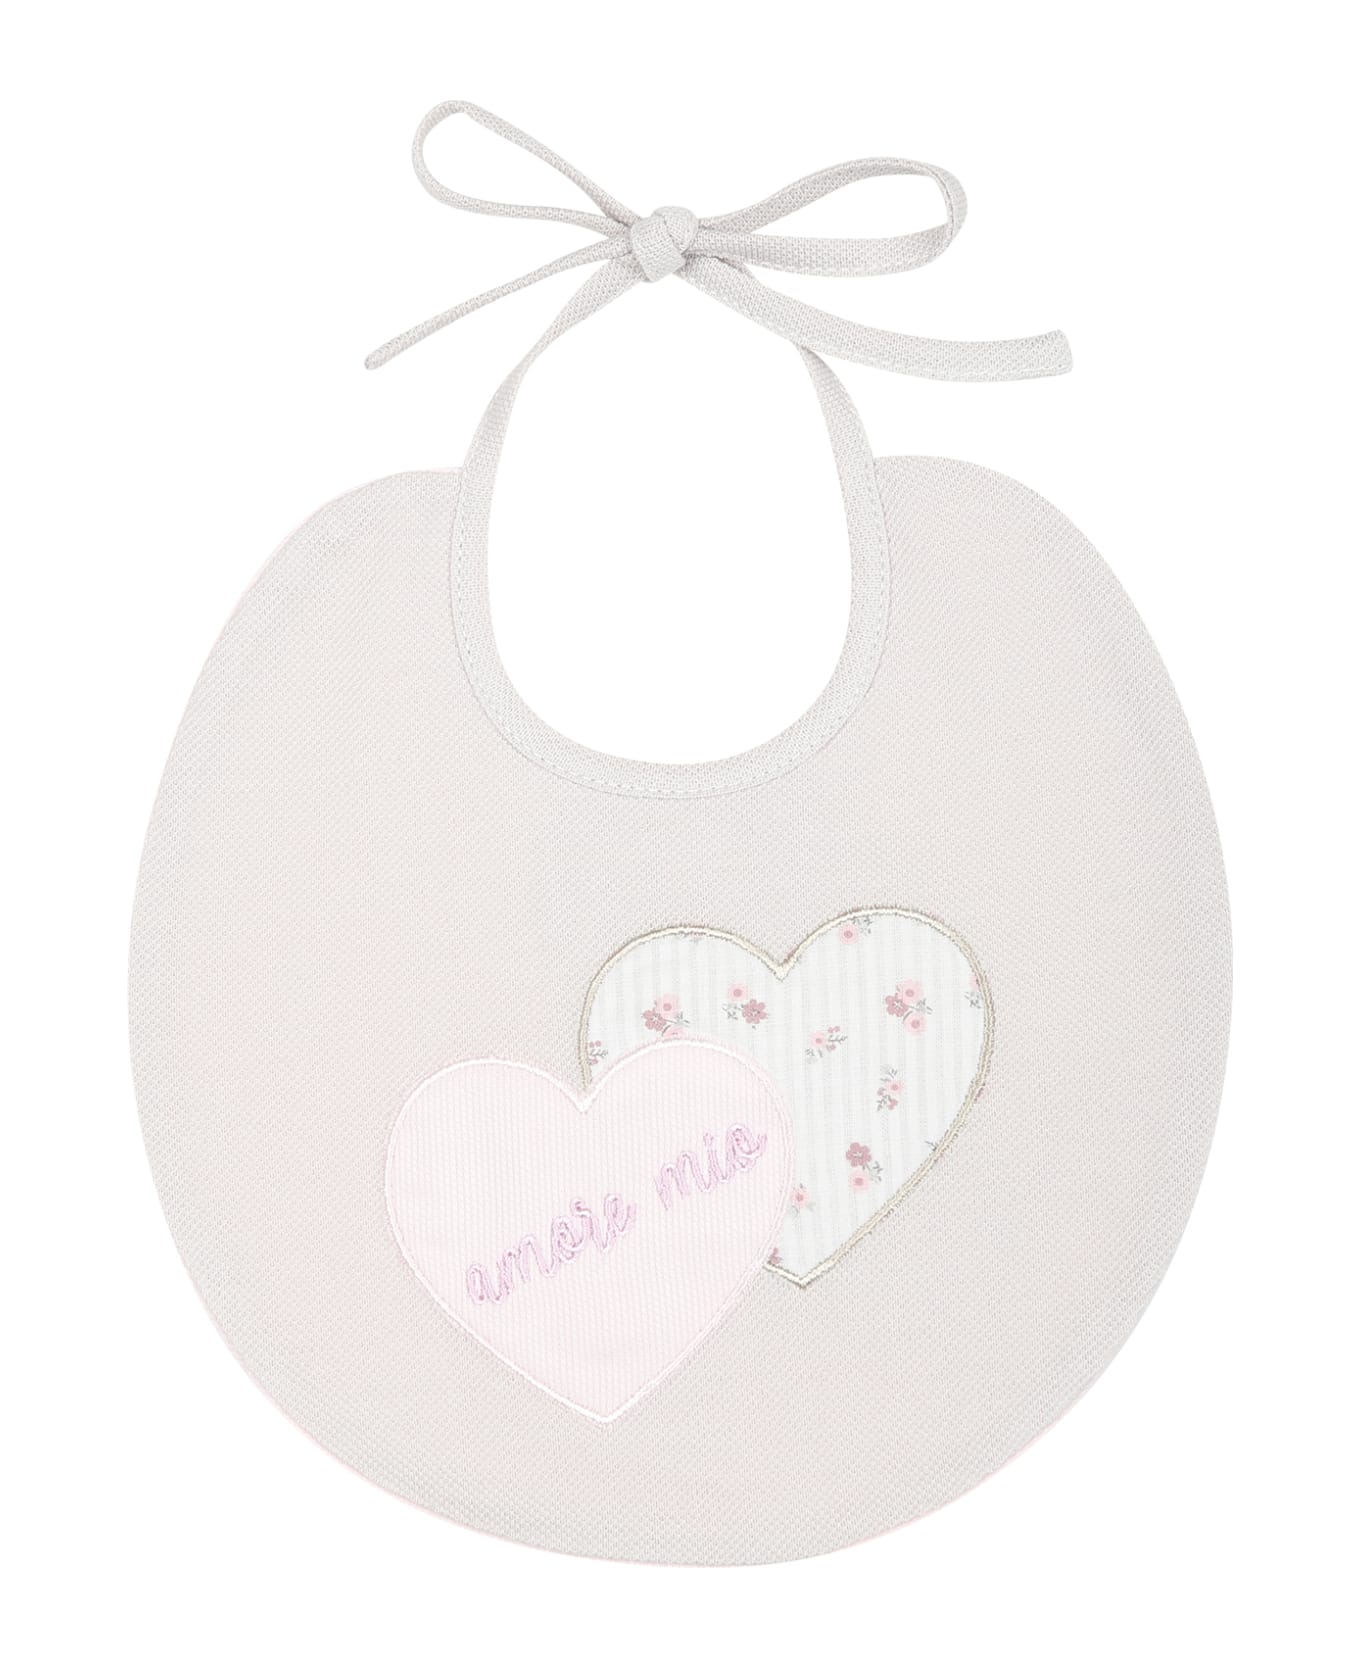 La stupenderia Beige Bib For Baby Girl With Hearts And Writing - Beige